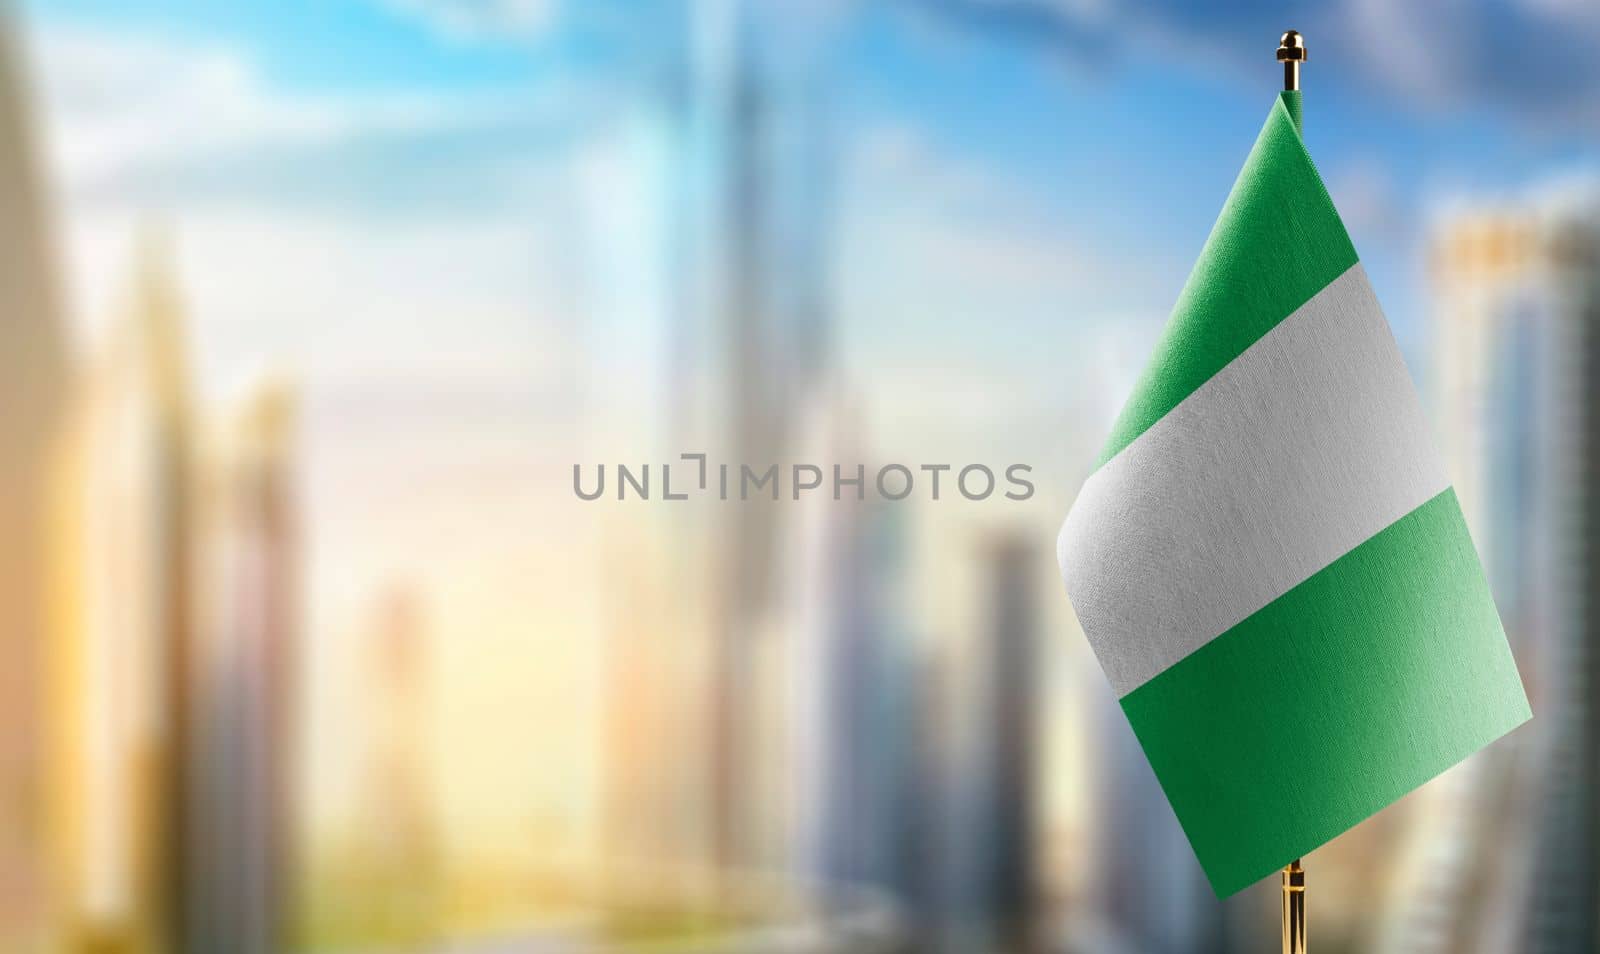 Small flags of the Nigeria on an abstract blurry background by butenkow